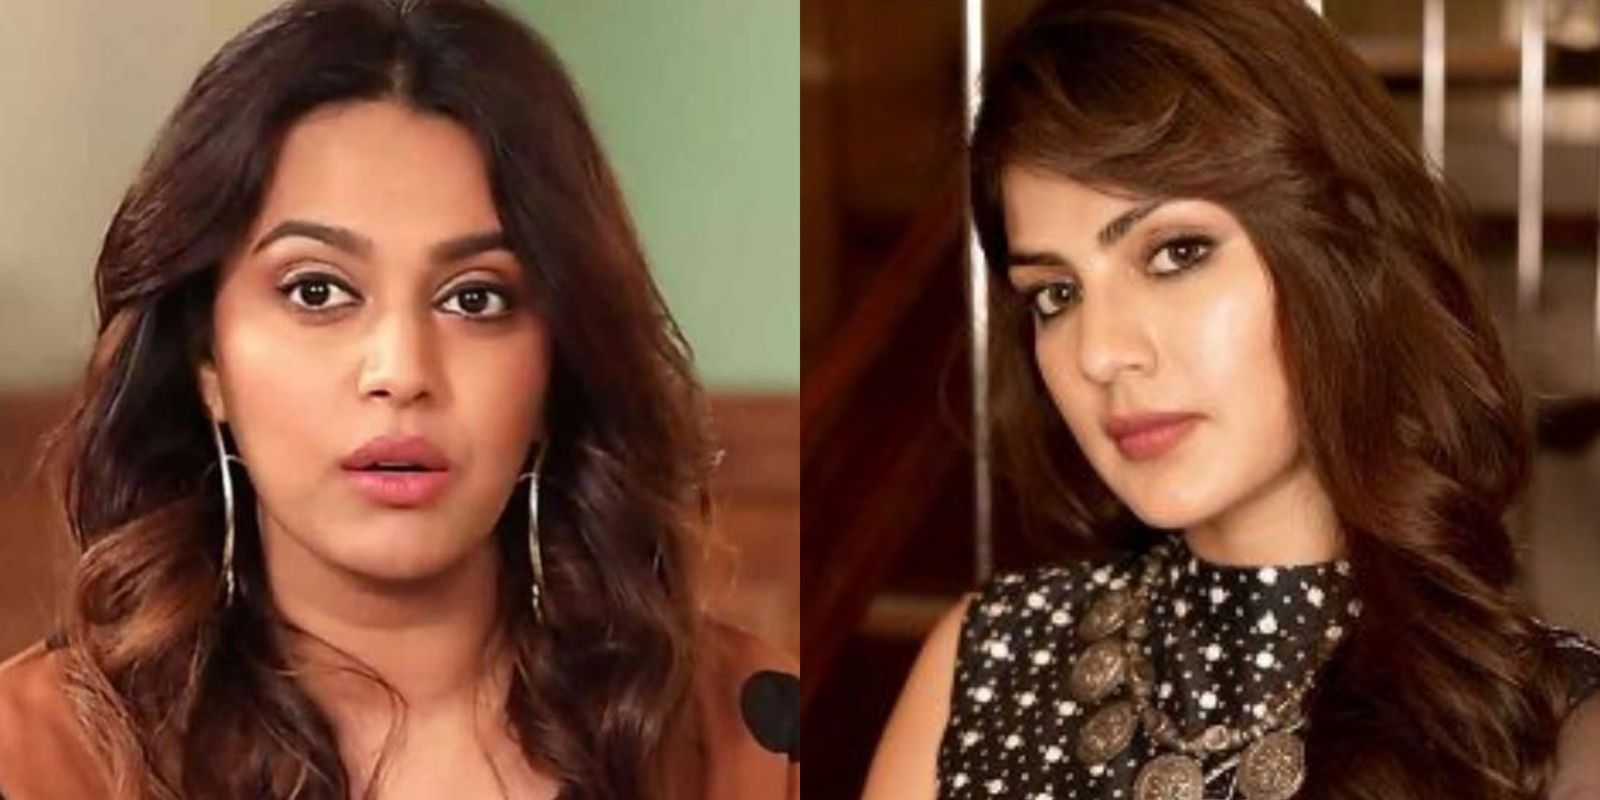 Swara Bhaskar Supports Sushant’s Girlfriend Rhea; Says She Is Being Subjected To A Bizarre, Dangerous Media Trial